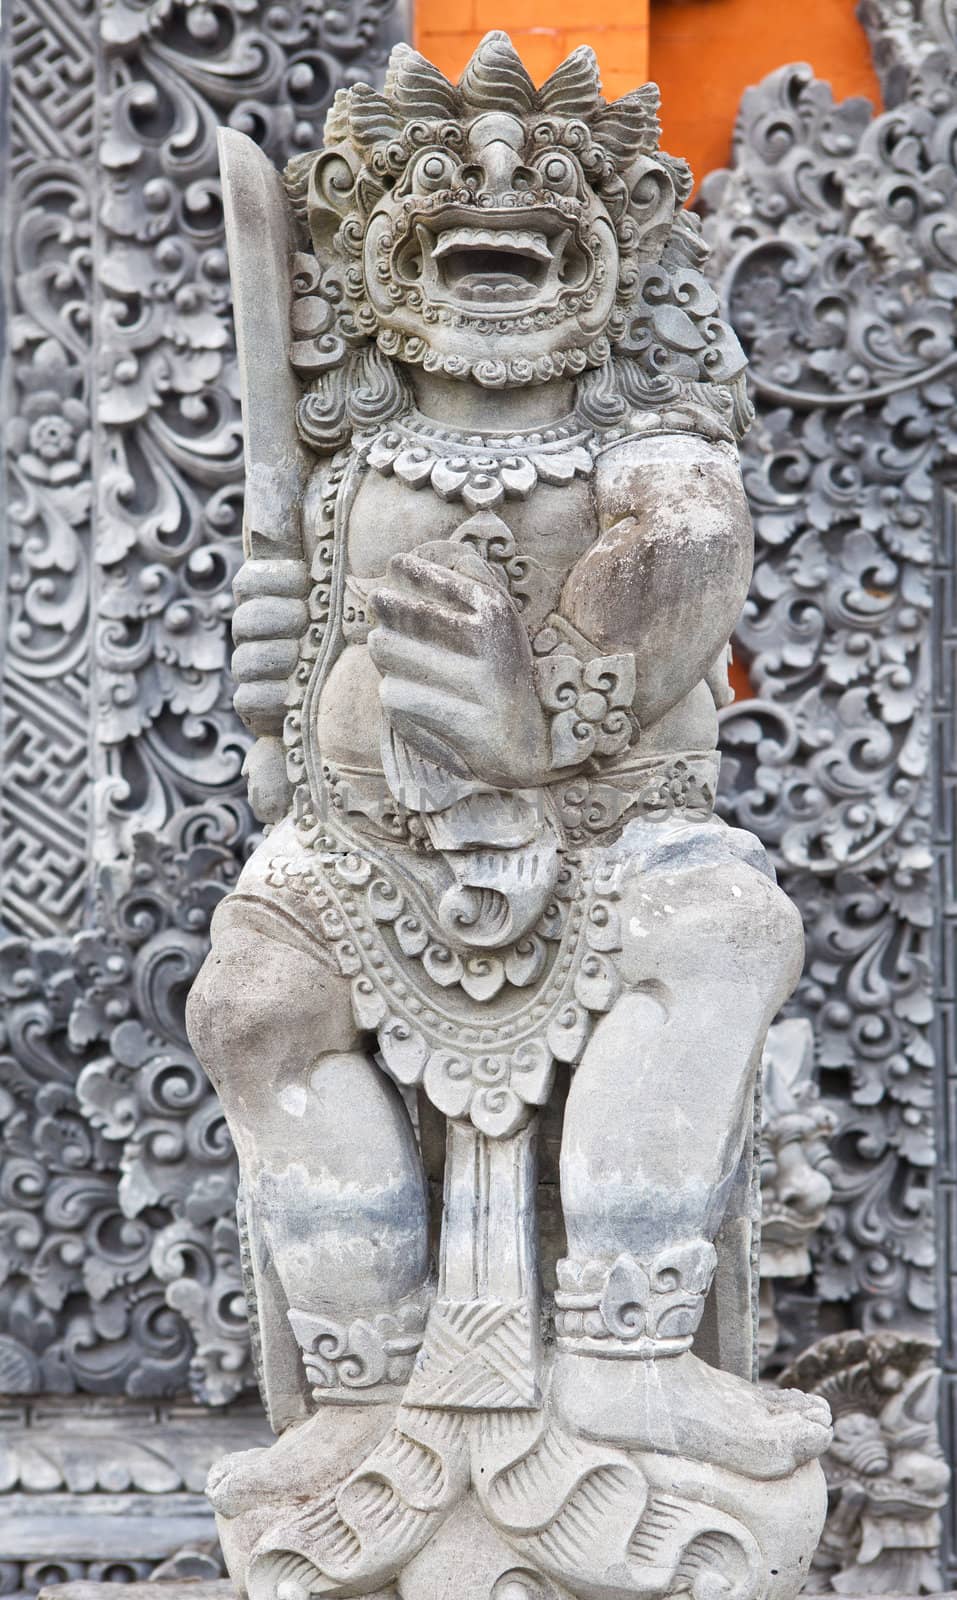 Detail of Sculpture stone in Bali, Indonesia